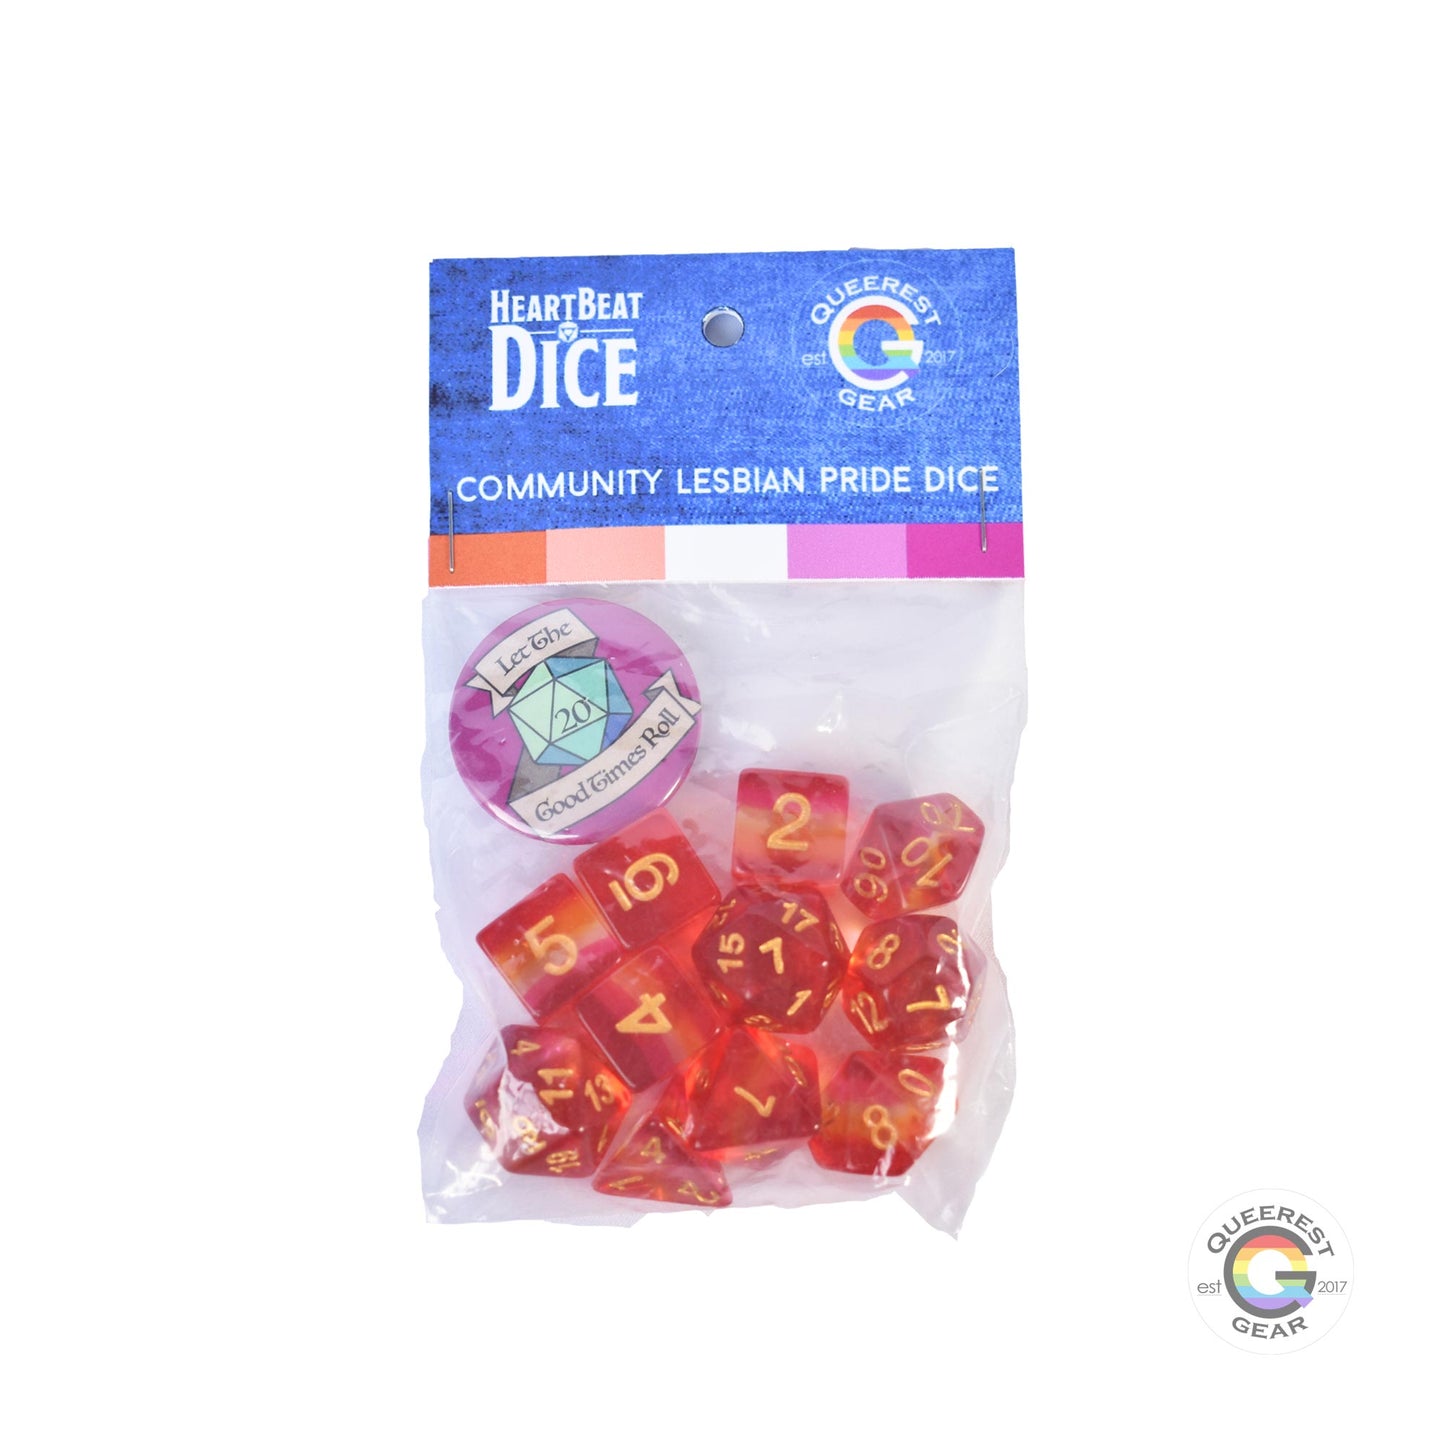 Lesbian pride dice in their packaging with a free “let the good times roll” button